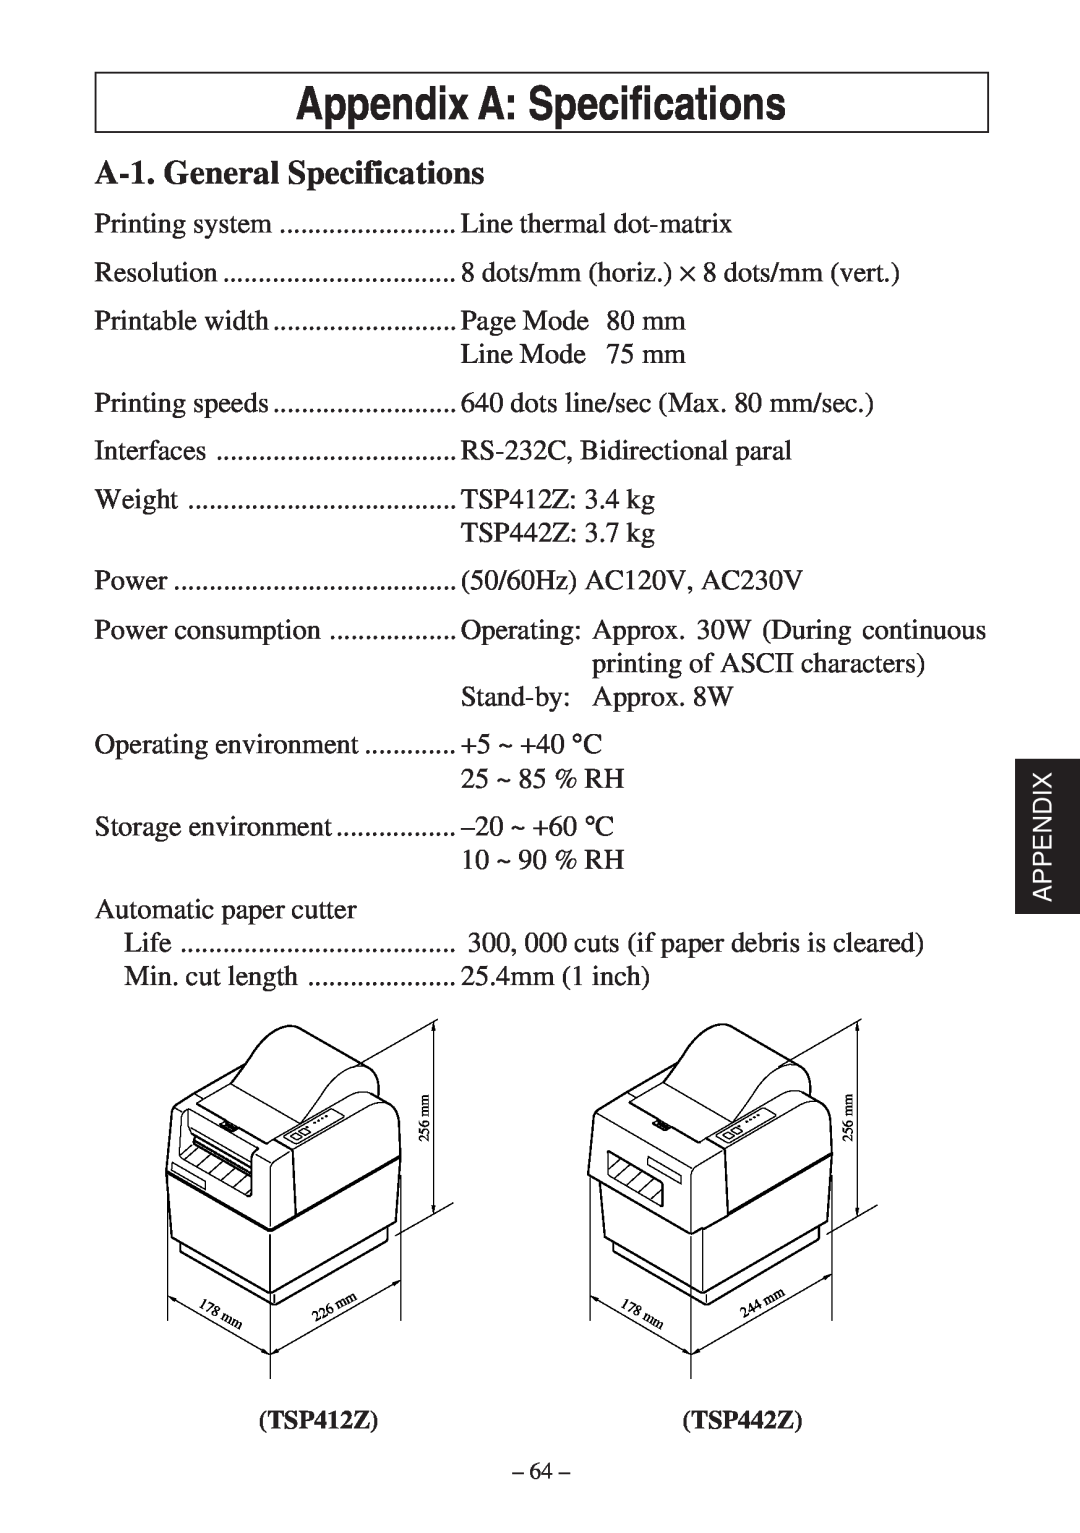 Star Micronics TSP400Z Series user manual Appendix A Specifications, A-1. General Specifications 